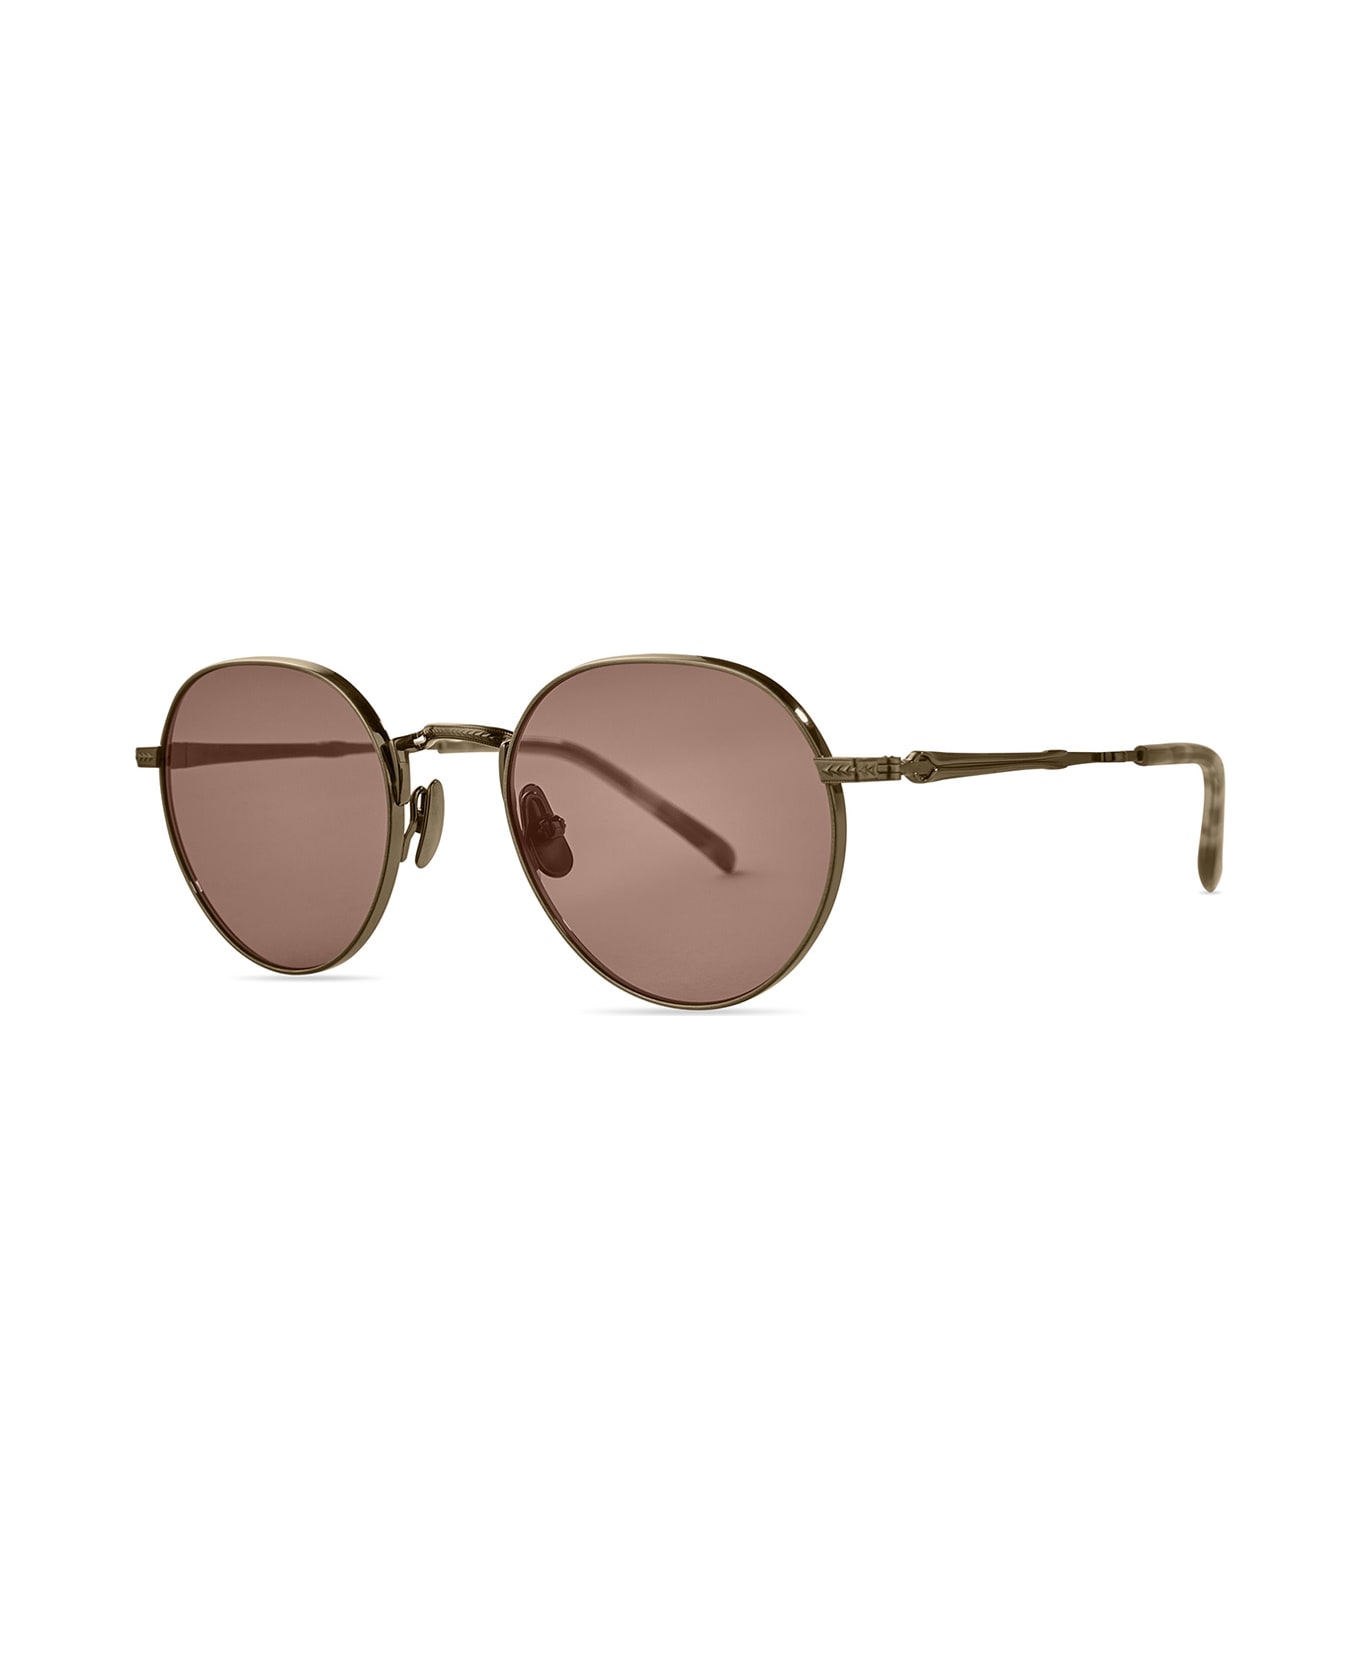 Mr. Leight Hachi S Antique Gold-blonde Shell/semi-flat Tahitian Rose Sunglasses - Antique Gold-Blonde Shell/Semi-Flat Tahitian Rose